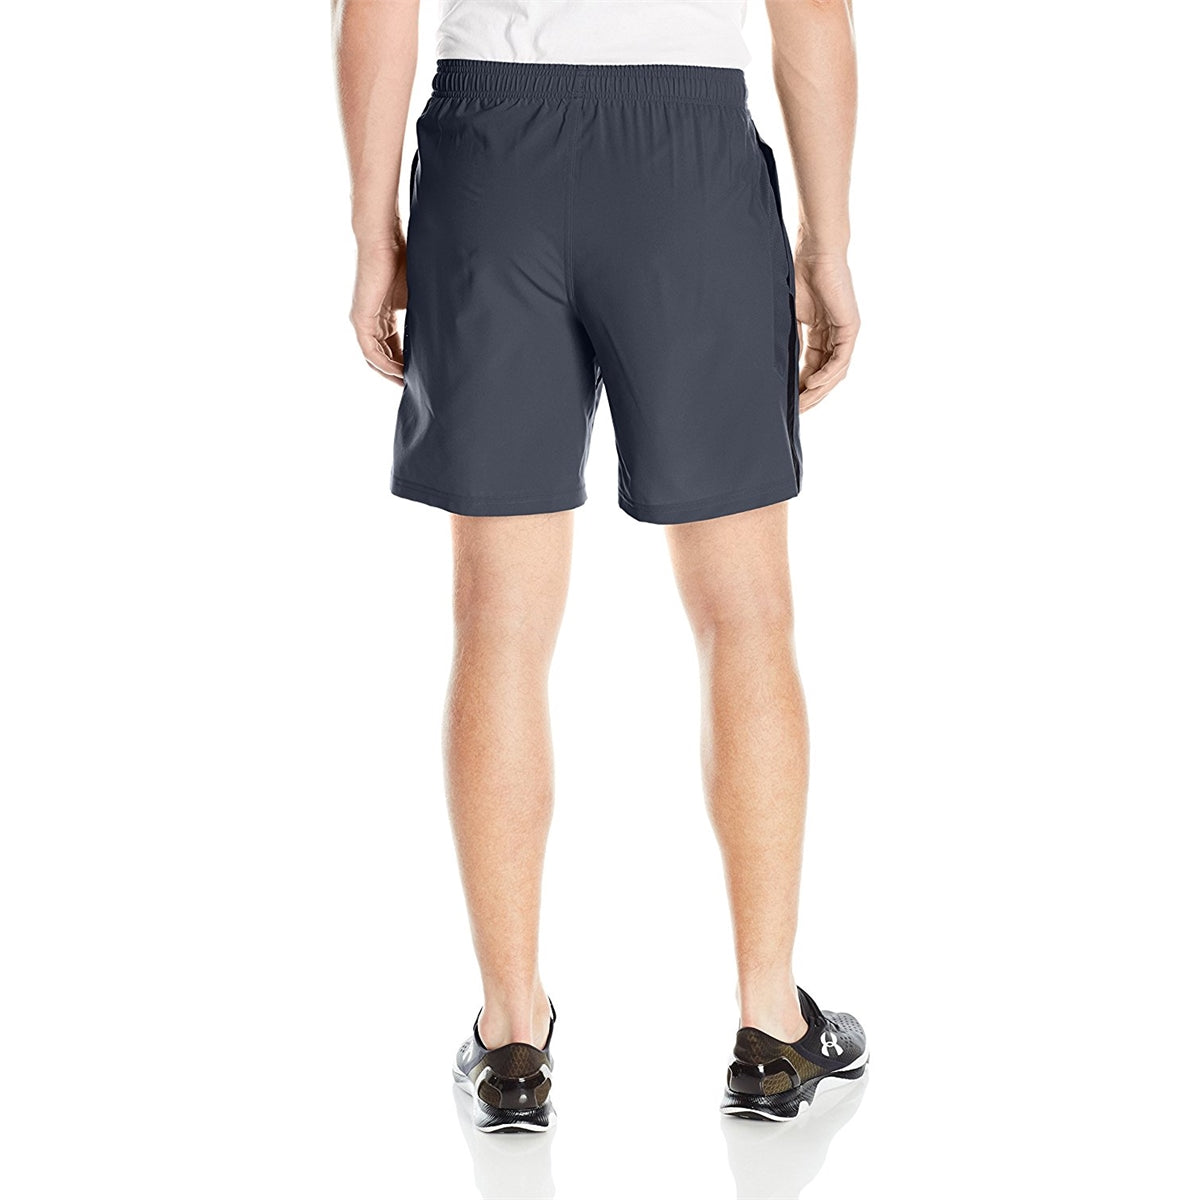 Under Armour Men Launch Stretch Woven 7 Inch Running Shorts